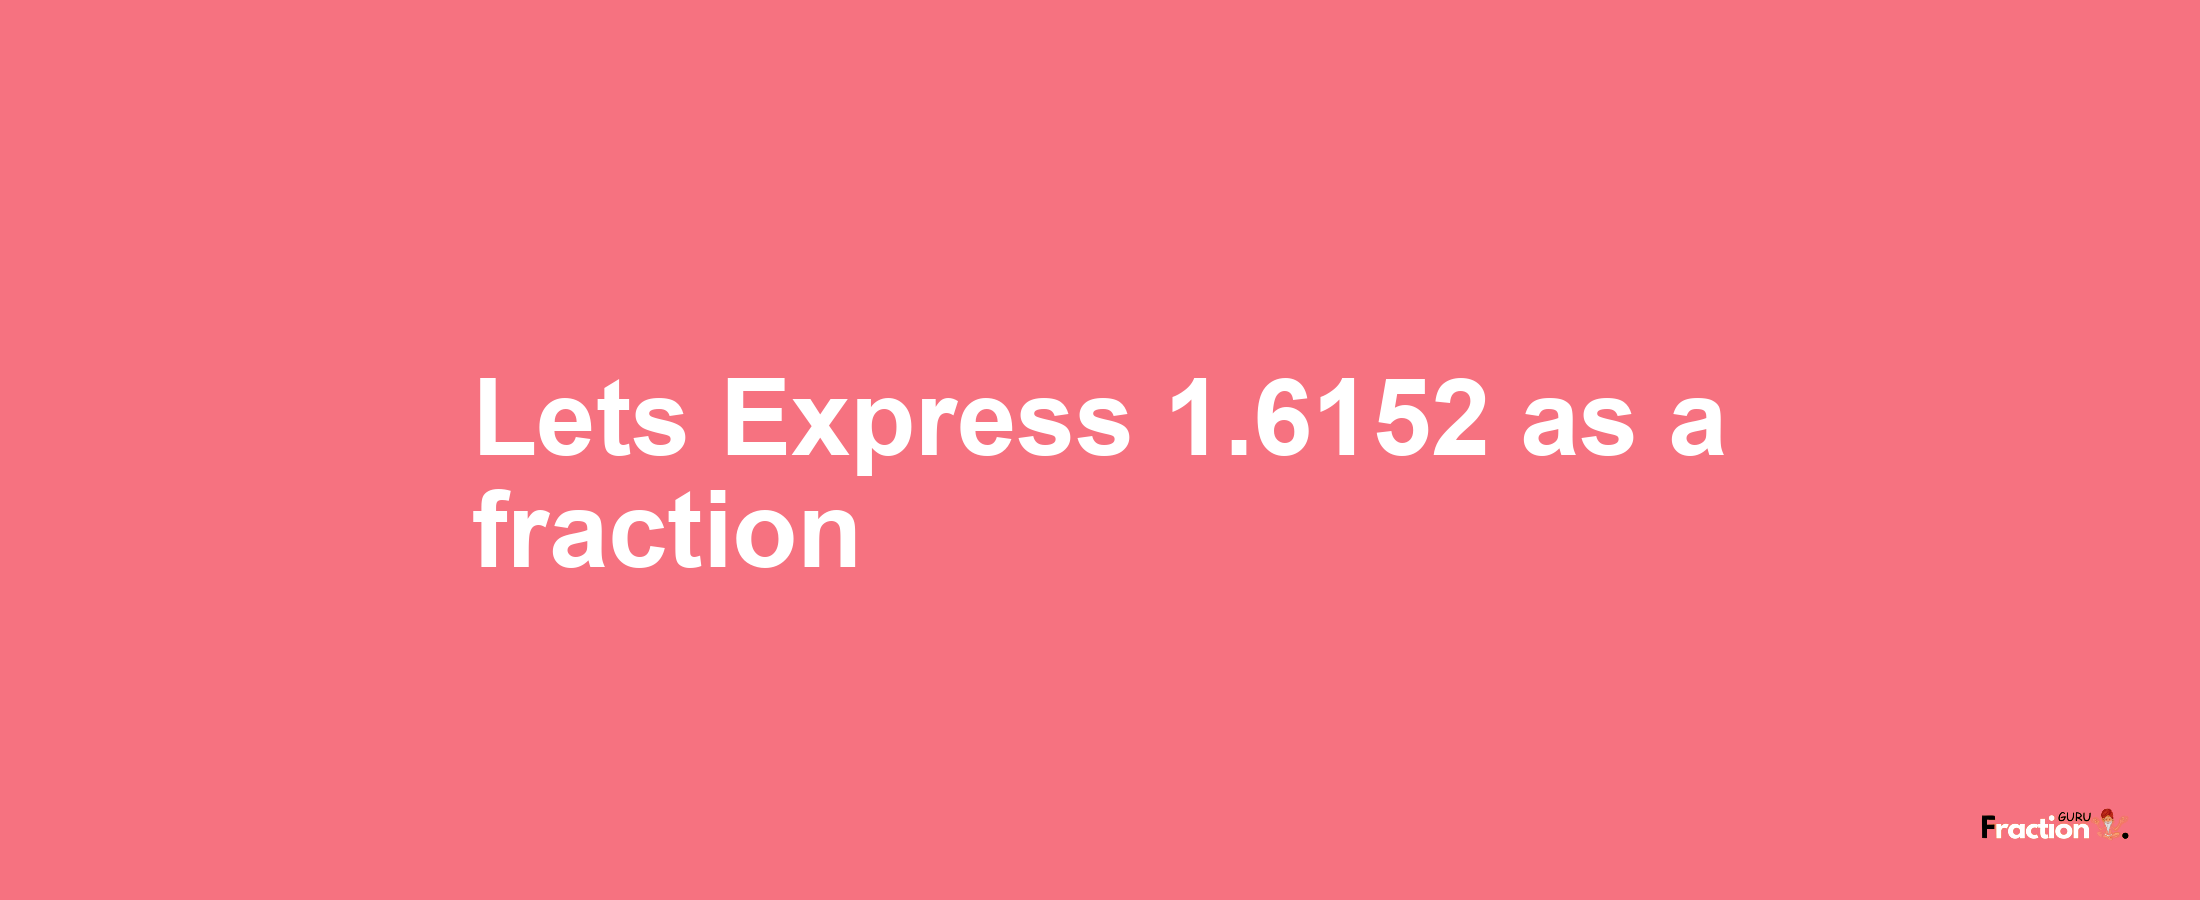 Lets Express 1.6152 as afraction